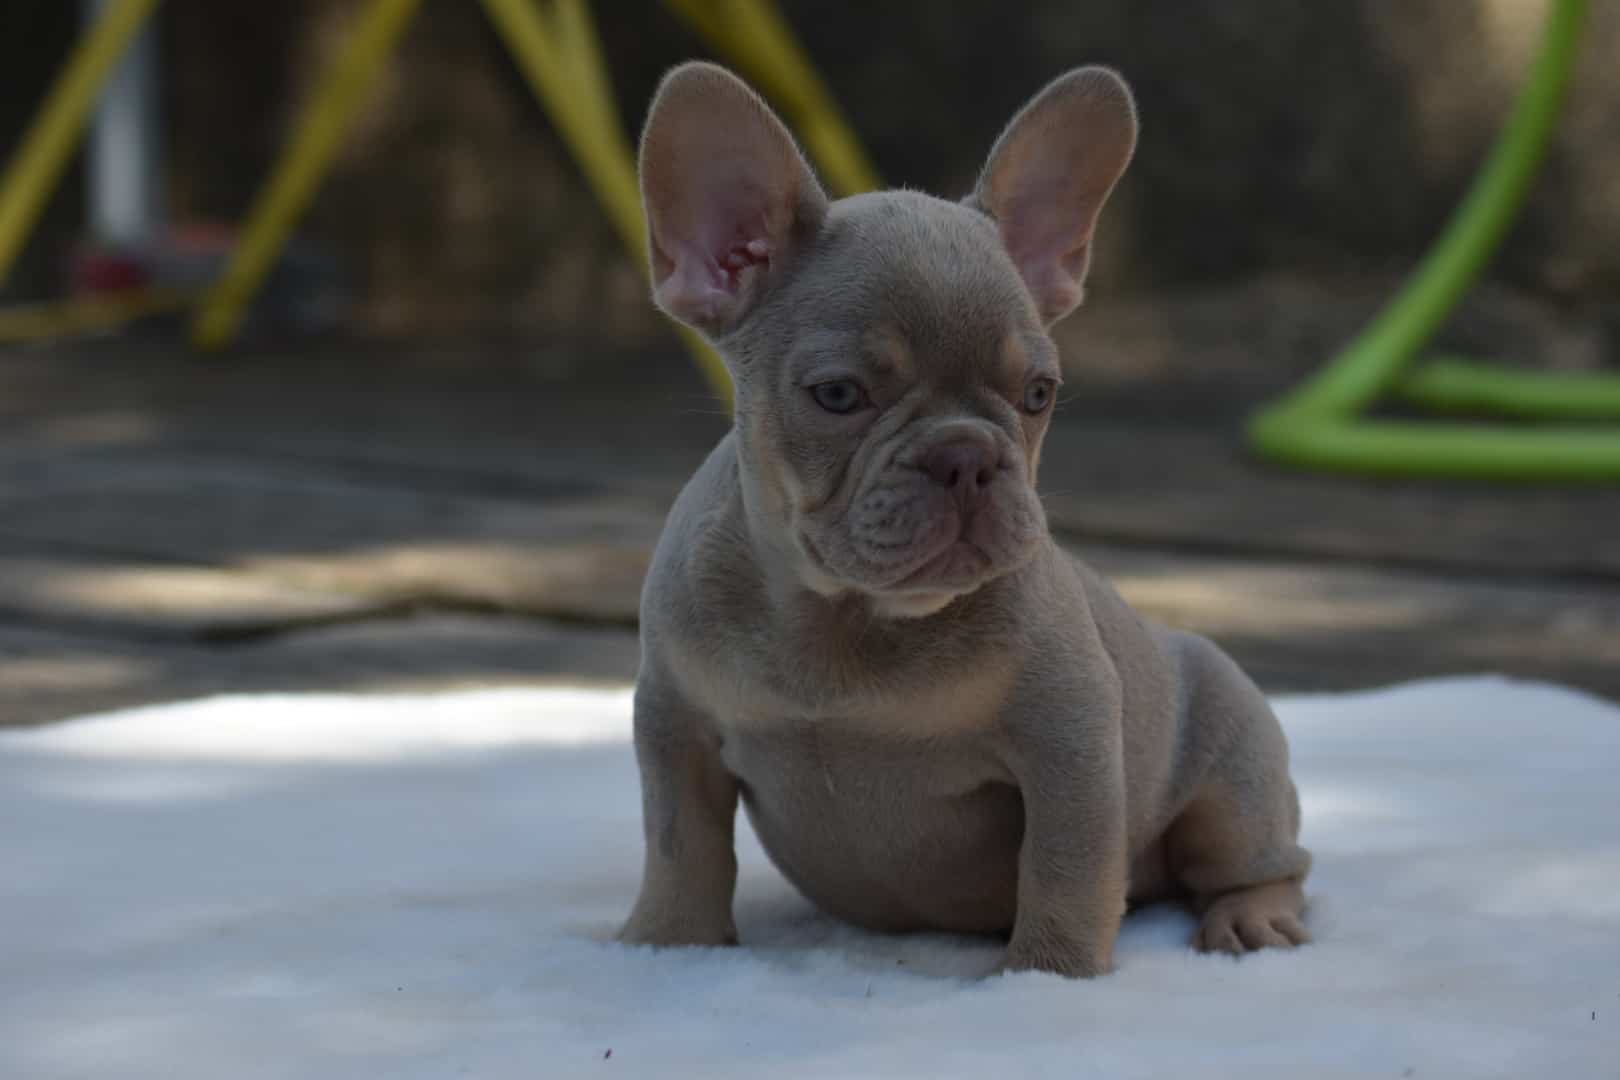 Mâle chiot male bouledogue français exotique isabella tan new shade puppy french bulldog frenchie